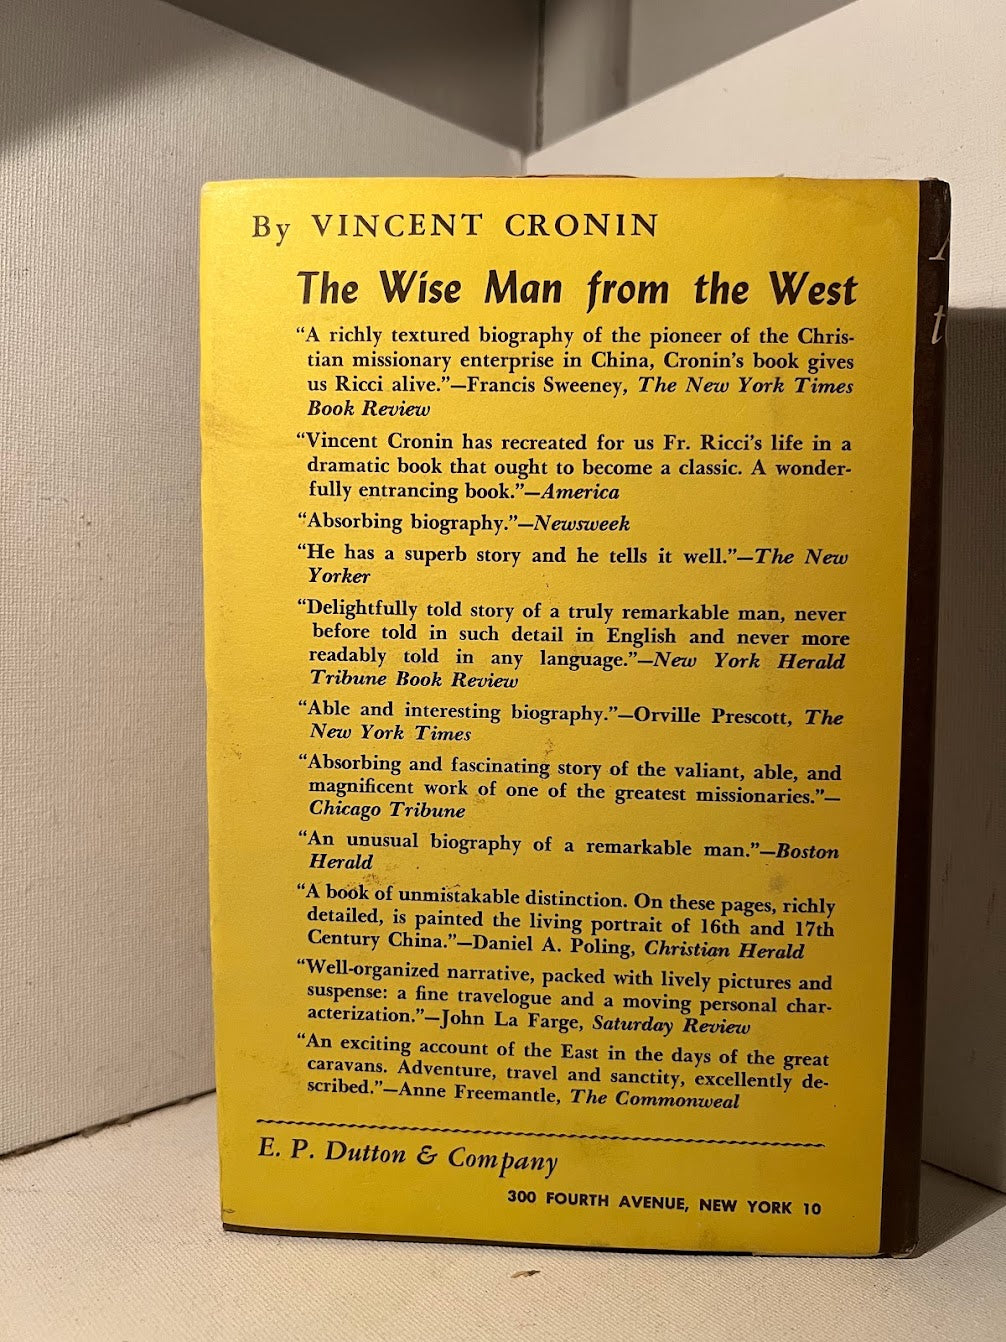 A Pearl to India by Vincent Cronin